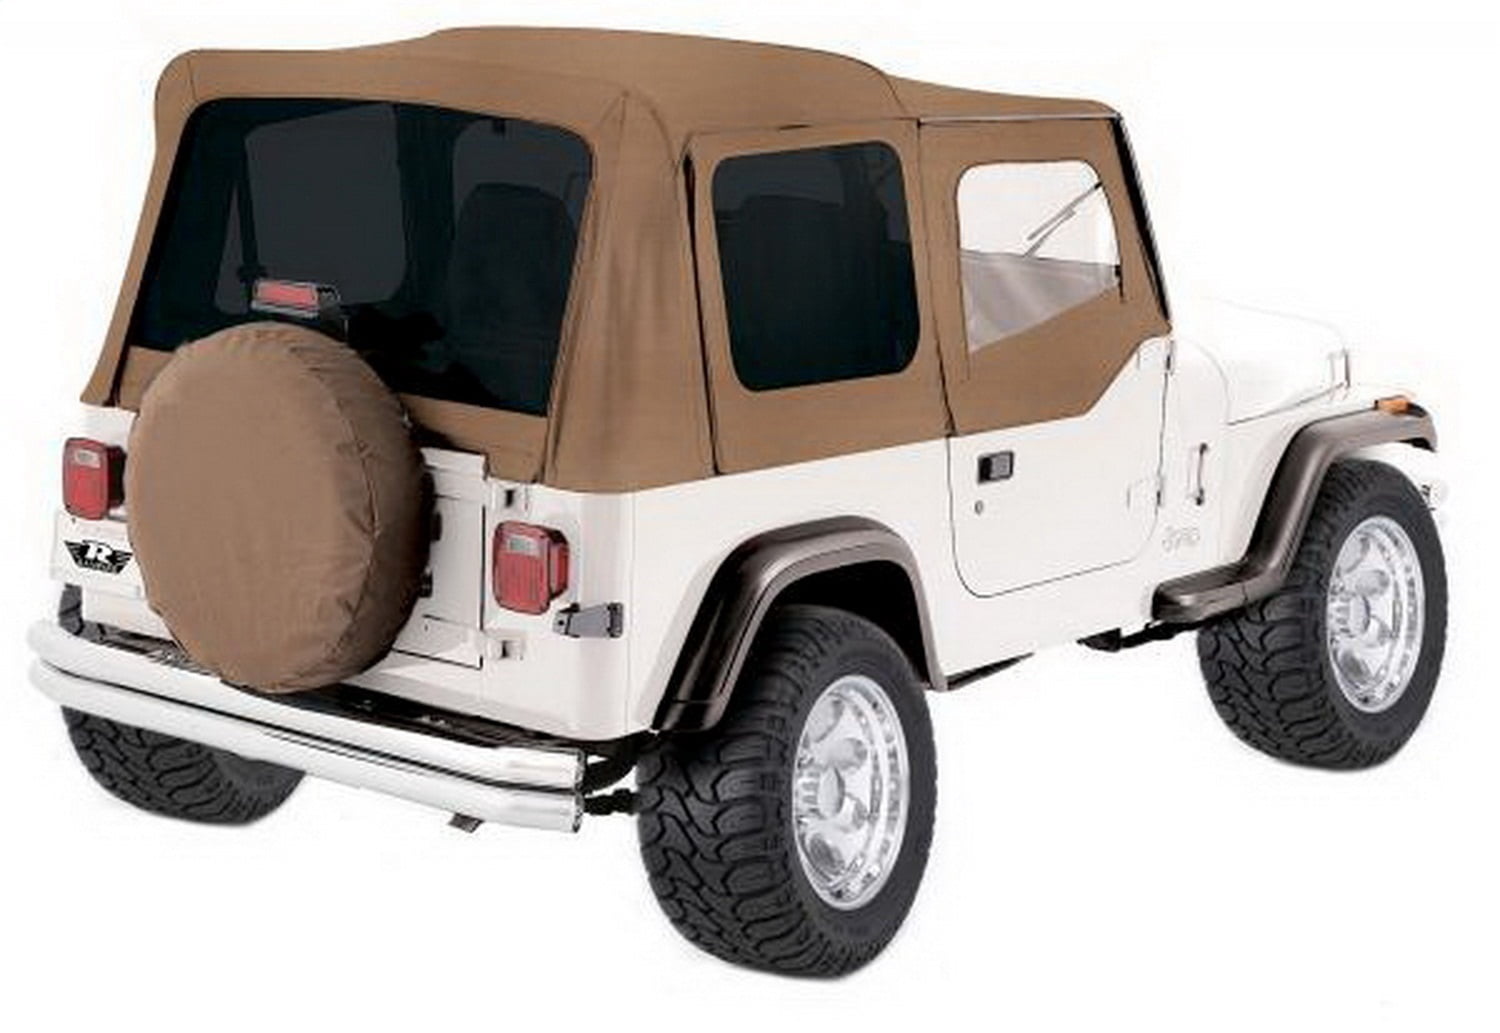 Rampage Products 68217 Complete Soft Top Kit with Frame, Hardware, & Door  Skins for 1987-1995 Jeep Wrangler YJ, Spice Denim w/Tinted Windows -  